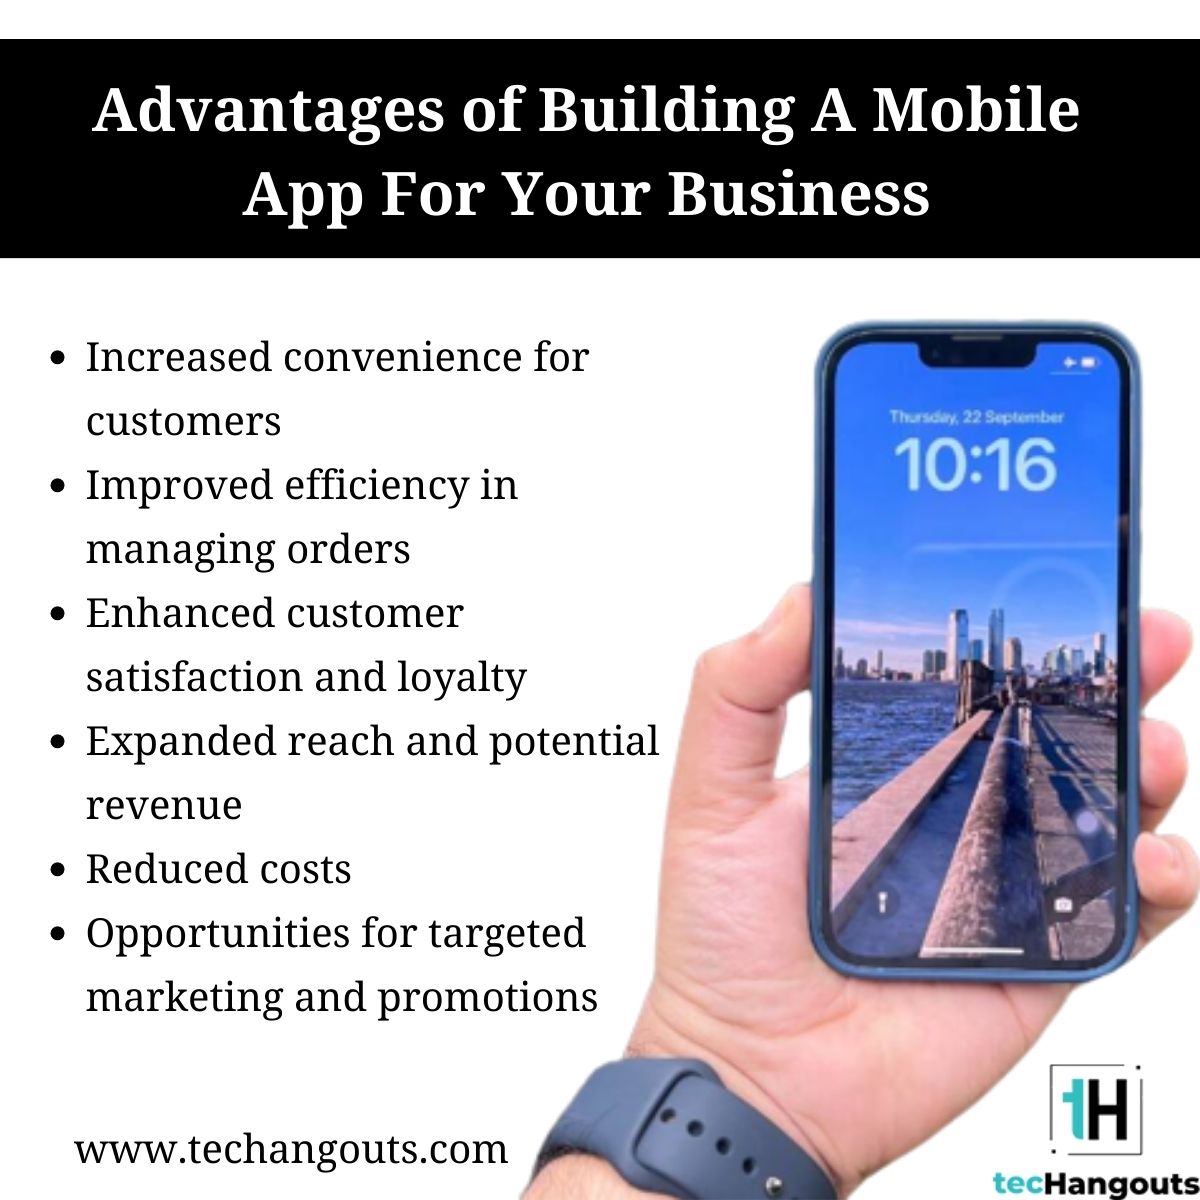 Do you remain uncertain about whether to invest in #appdevelopment for your business? You shouldn't overlook the benefits of having your own mobile application!

Explore the reasons why creating an app can propel your business to new levels. 📱📈

#MobileApp #BusinessGrowth